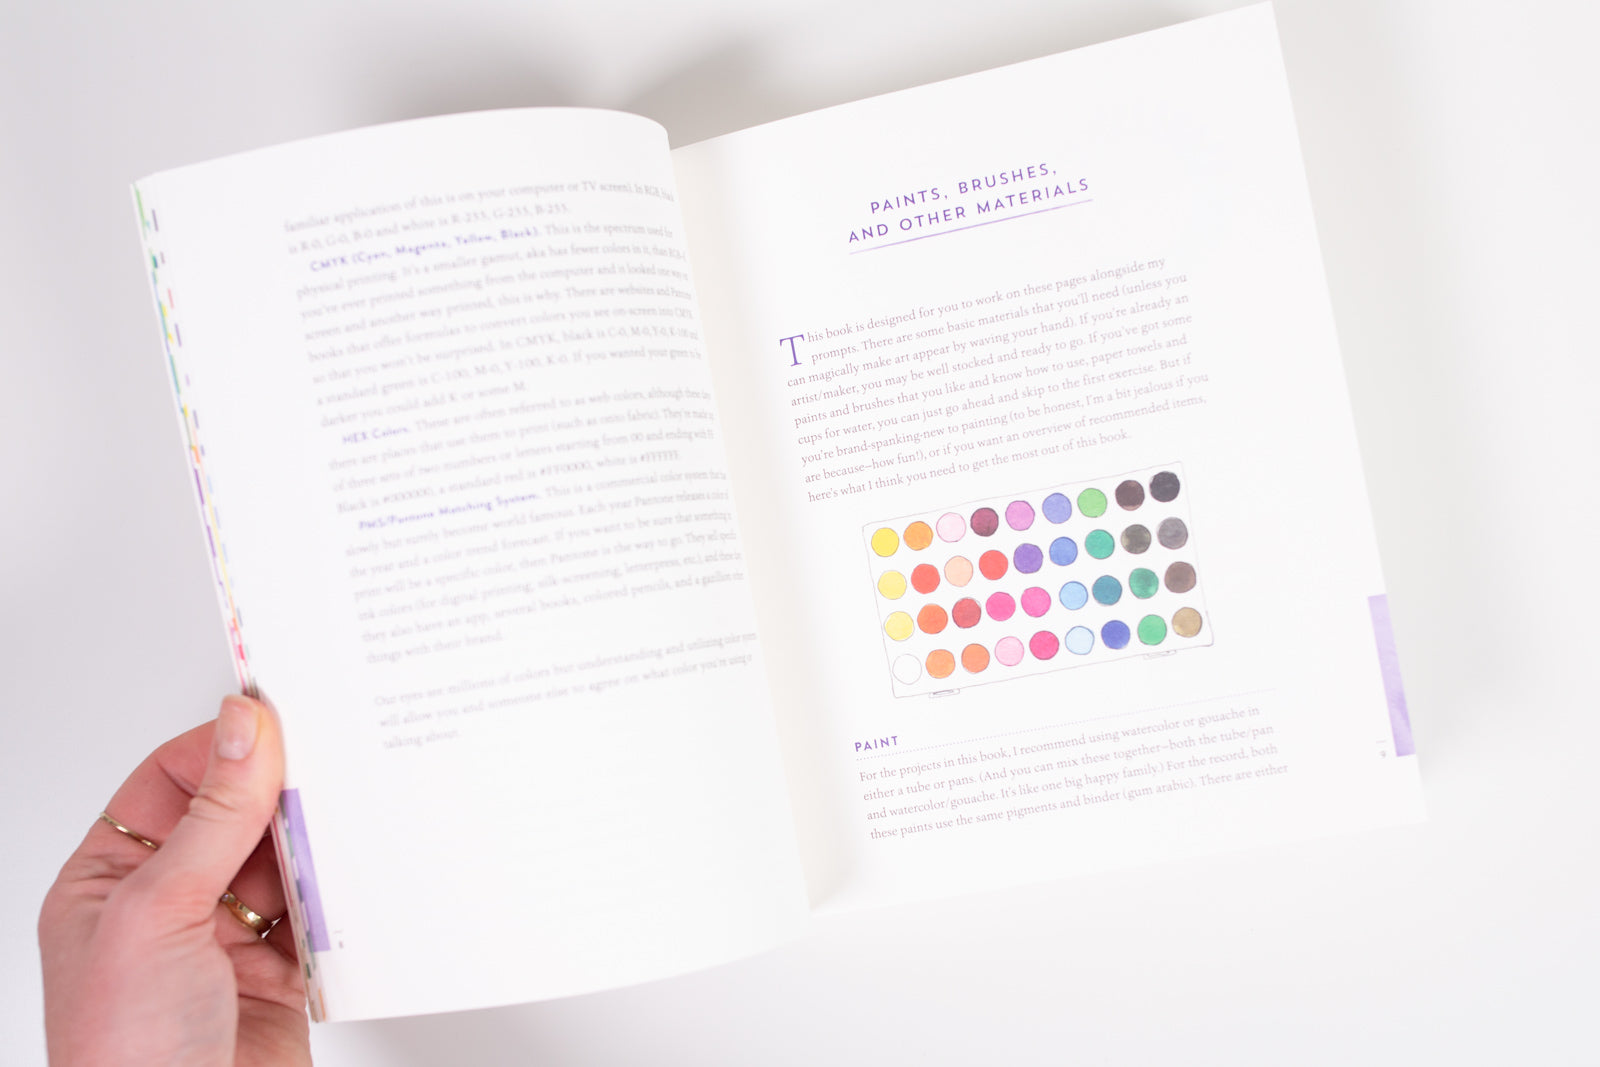 A Field Guide to Color' by Lisa Solomon